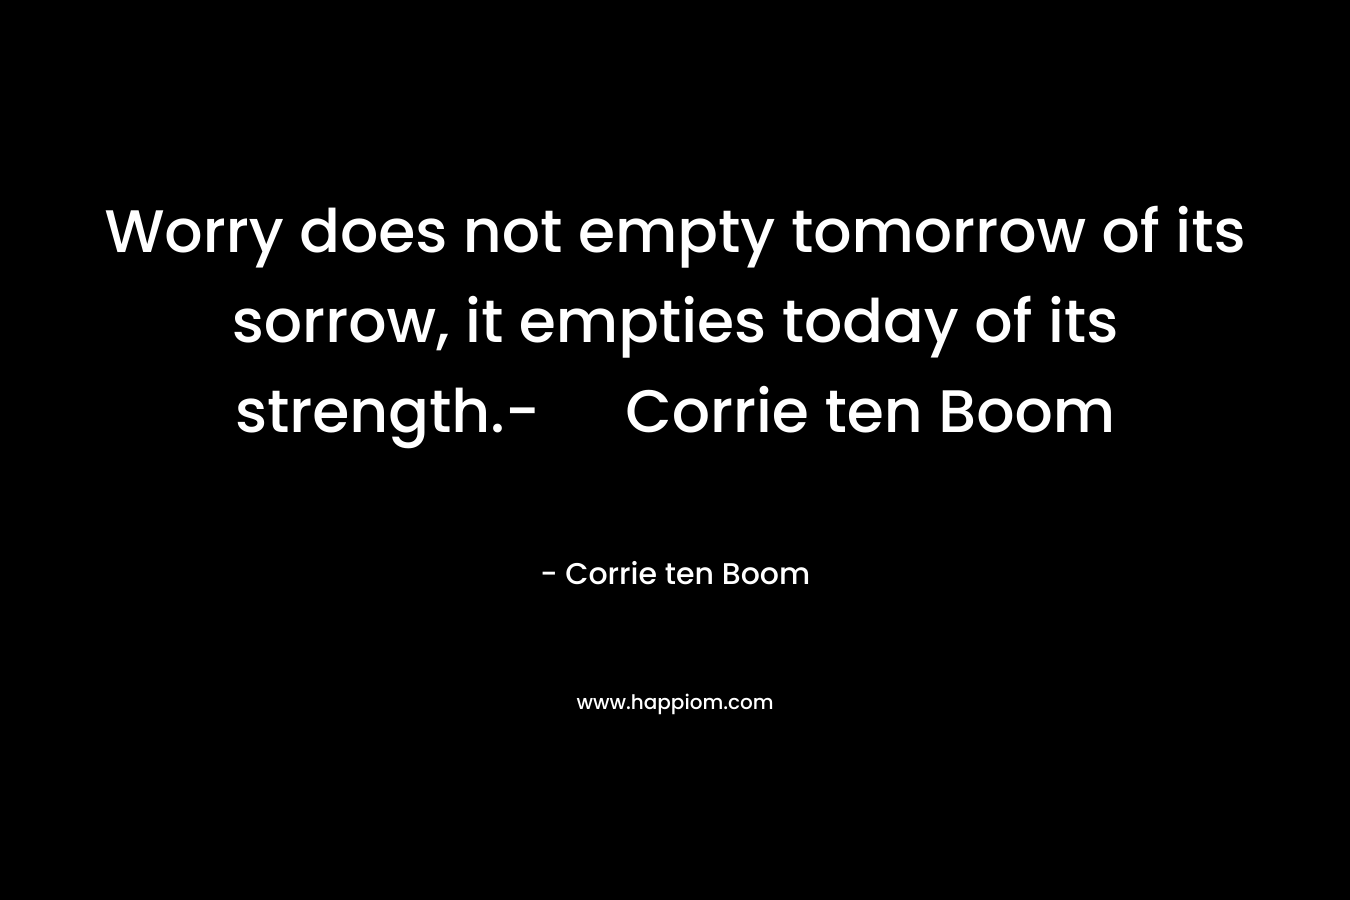 Worry does not empty tomorrow of its sorrow, it empties today of its strength.- Corrie ten Boom